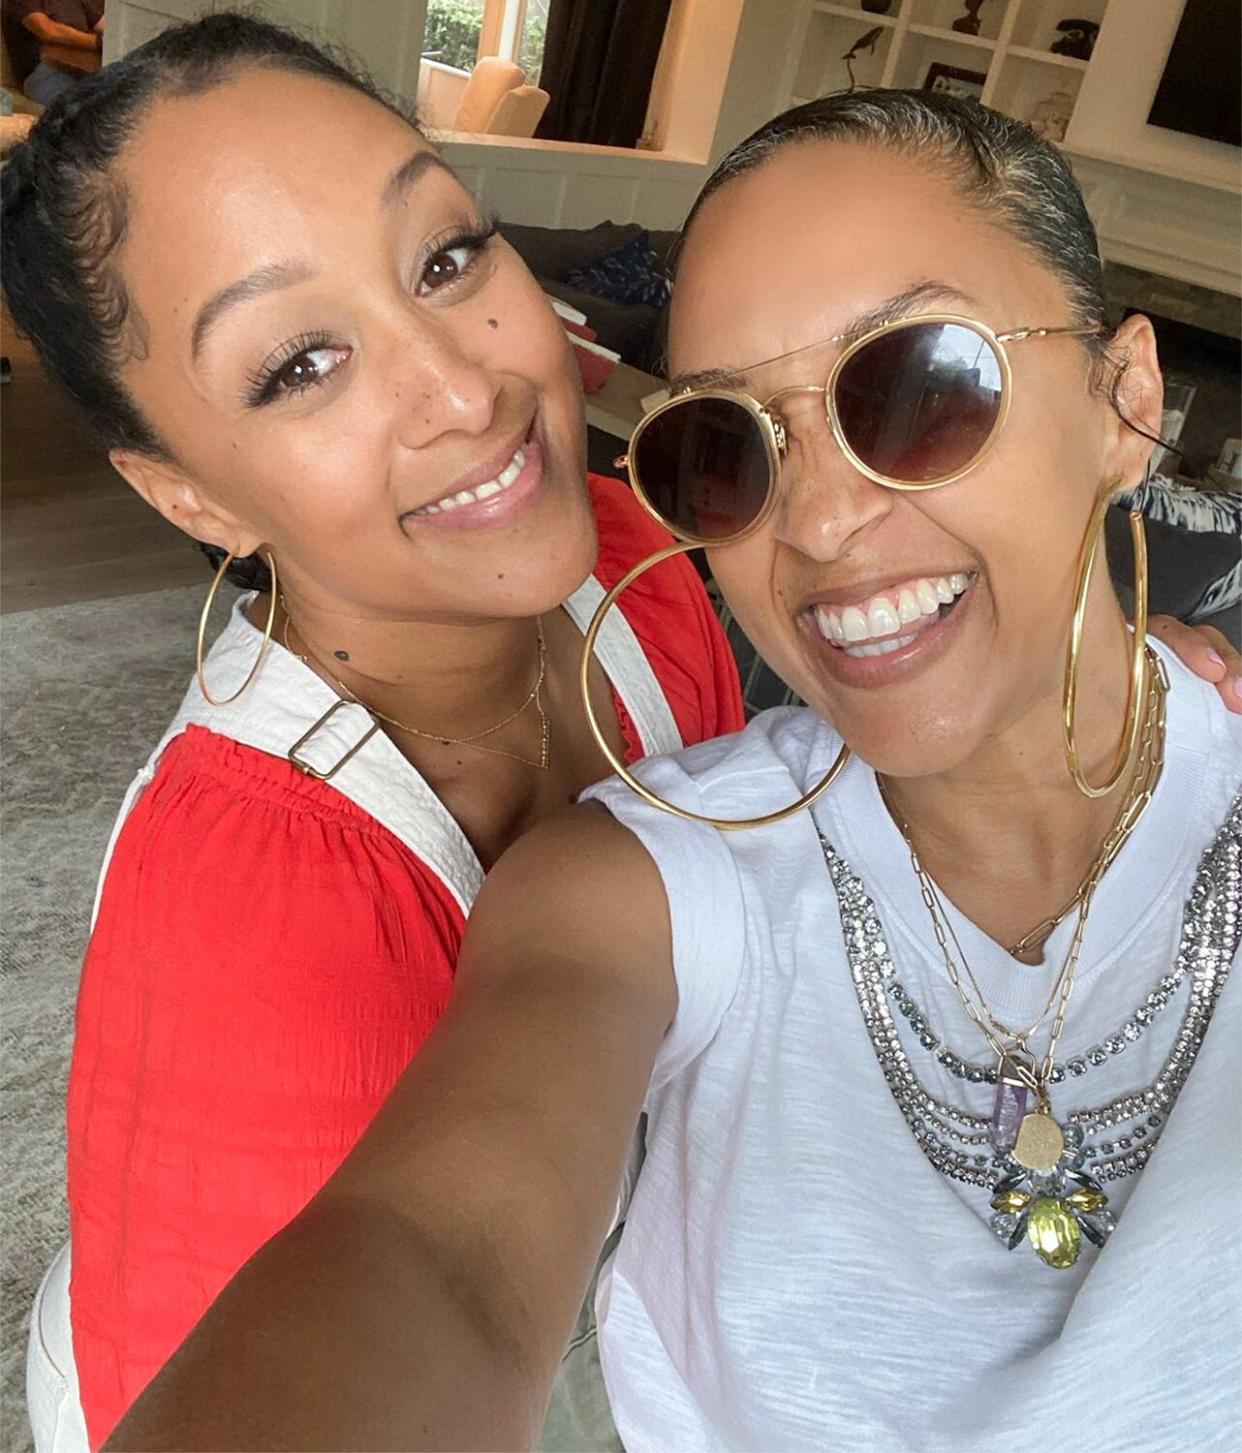 Tia Mowry and Tamera Mowry Get Their Kids Together For a Play Date: ‘Family Over Everything’